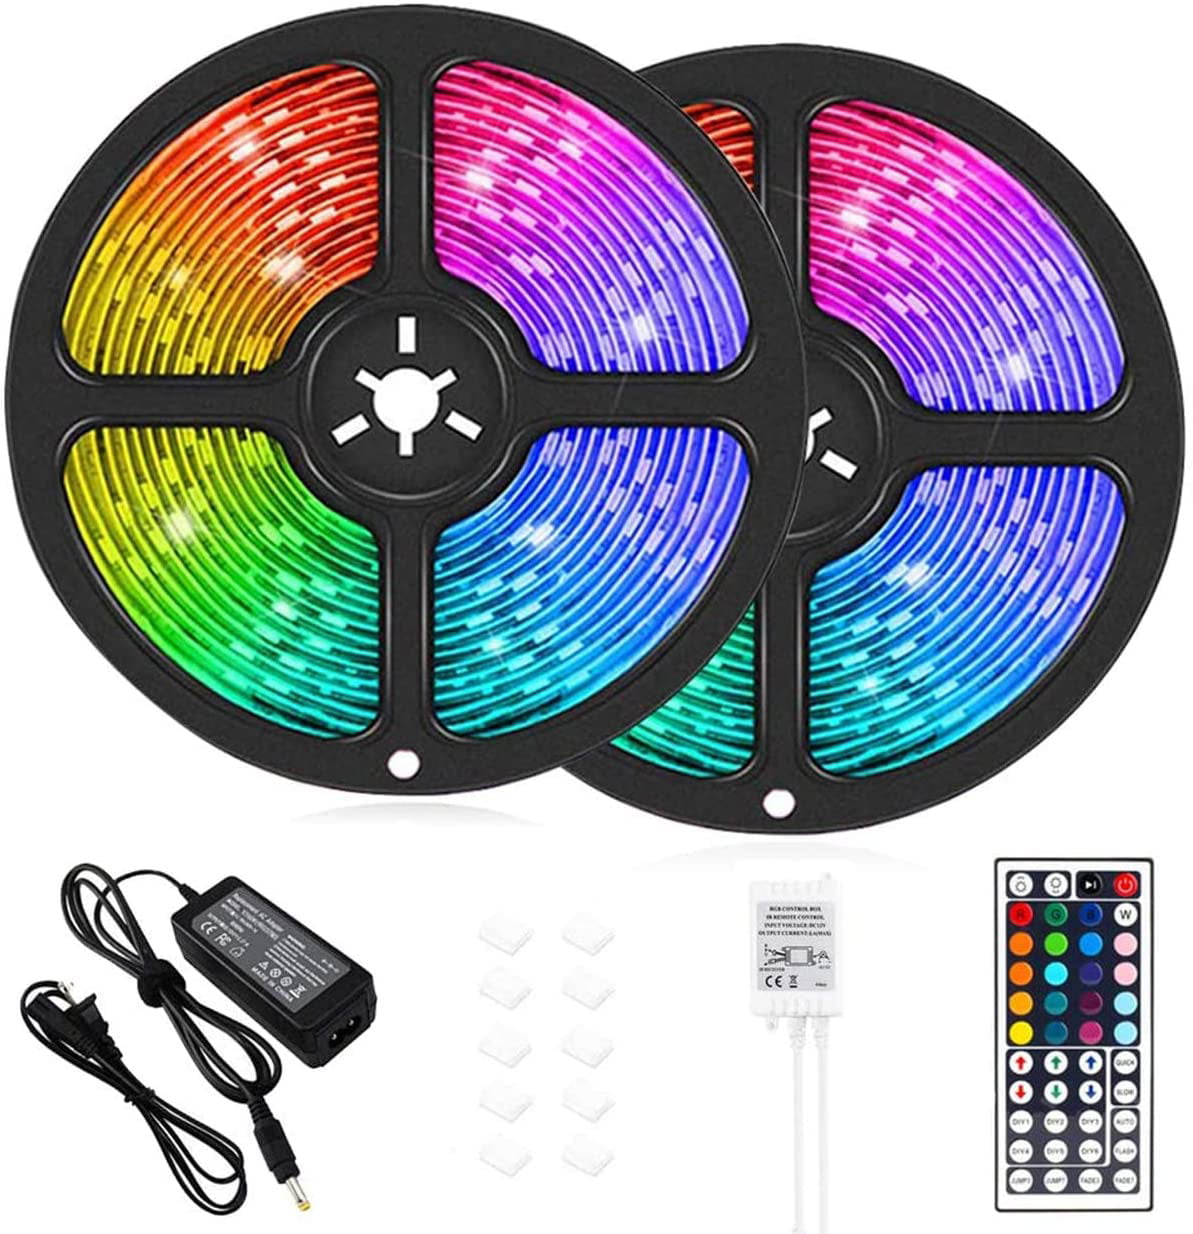 Details about   49/32 Feet Flexible 3528 RGB LED Strip Lights Fairy Lights Room Bar Party Decor 